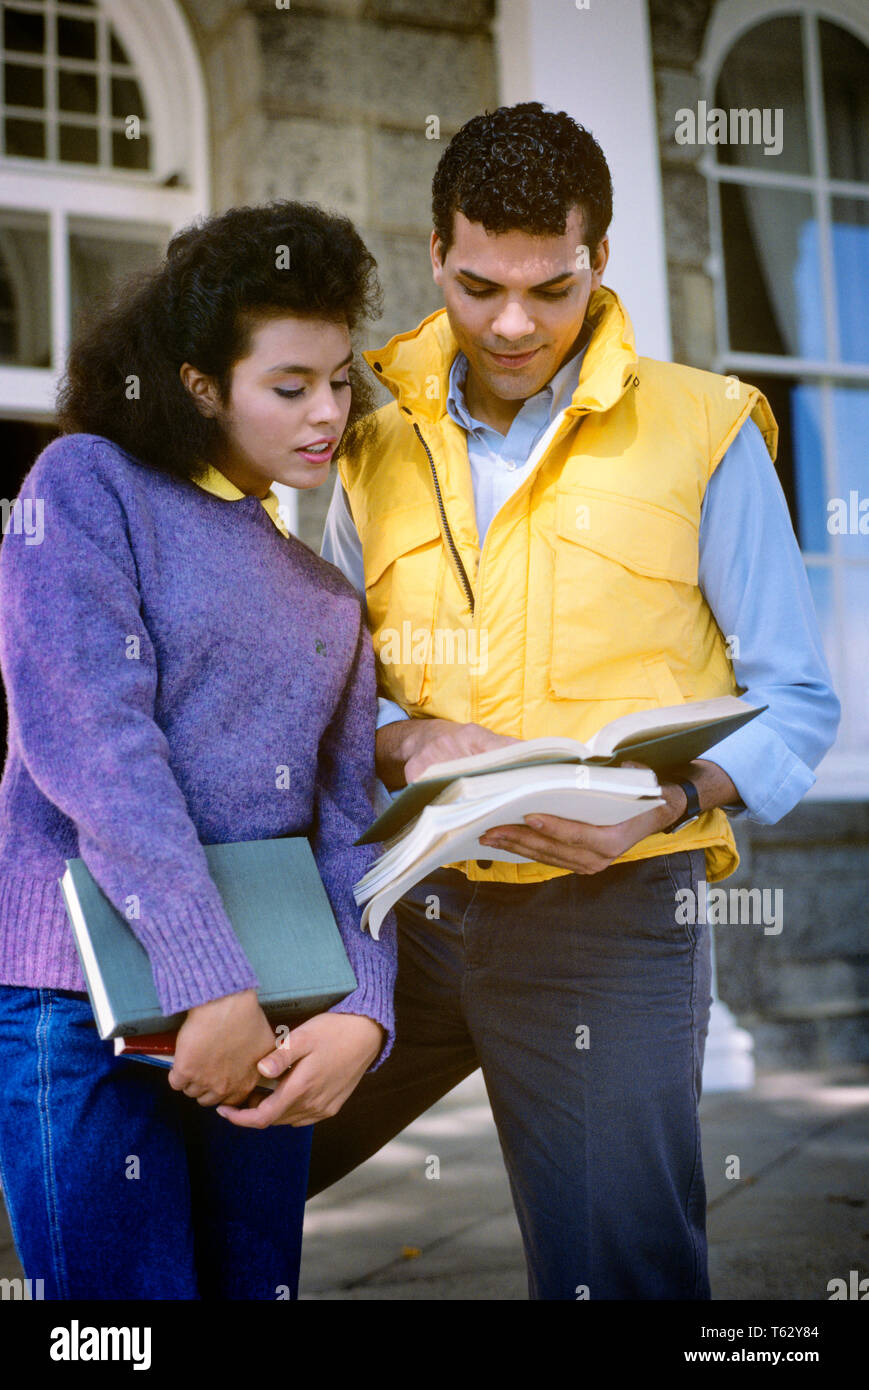 1980s AFRICAN AMERICAN COLLEGE COUPLE LOOKING AT TEXTBOOK - ks24461 DEG002 HARS ETHNIC SWEATER NOSTALGIC PAIR YELLOW DIVERSITY COLOR SHARING JEANS OLD TIME NOSTALGIA OLD FASHION JUVENILE STYLE COMMUNICATION YOUNG ADULT INFORMATION SONS LIFESTYLE CAMPUS FEMALES COPY SPACE FRIENDSHIP HALF-LENGTH PERSONS RACIAL MALES AMERICANS DENIM SHARE PURPLE STYLES UNIVERSITIES AFRICAN-AMERICANS AFRICAN-AMERICAN KNOWLEDGE LOW ANGLE ETHNIC DIVERSITY AFRO-AMERICAN AFRO-AMERICANS HIGHER EDUCATION CONNECTION BLACKS STYLISH TEENAGED COLLEGES COOPERATION FASHIONS HIGHER JUVENILES YOUNG ADULT MAN YOUNG ADULT WOMAN Stock Photo